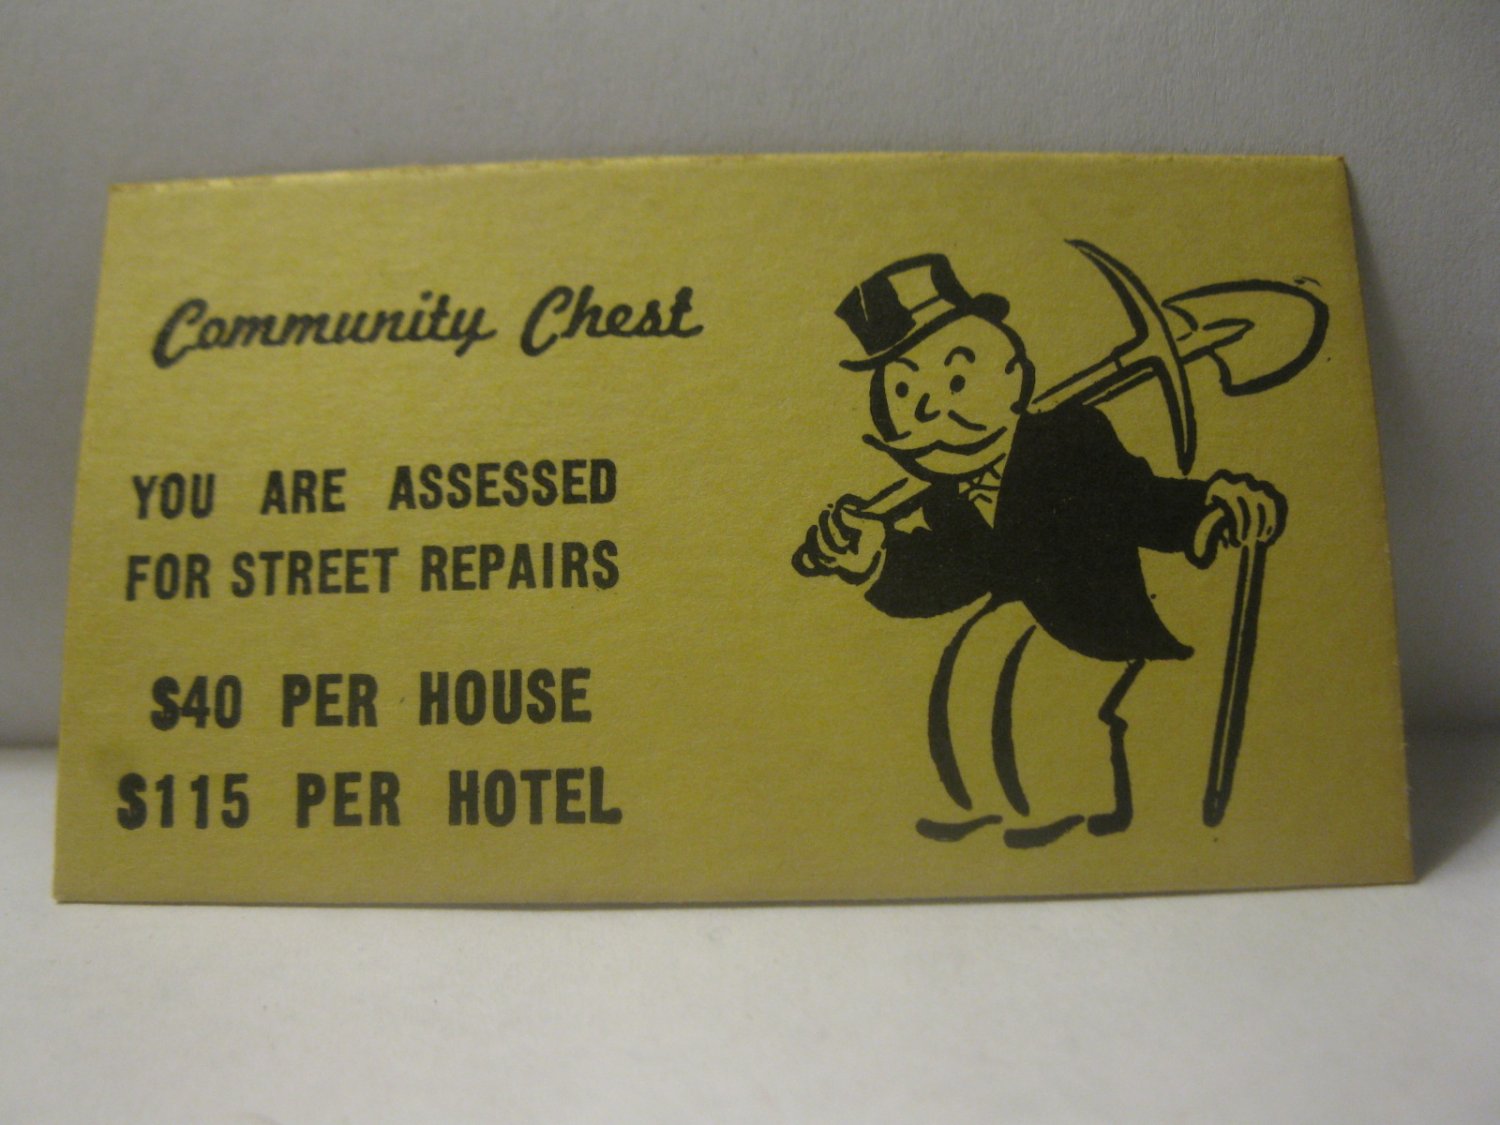 1952 Monopoly Popular Ed. Board Game Piece: Community Chest Card - Street Repairs Assessed